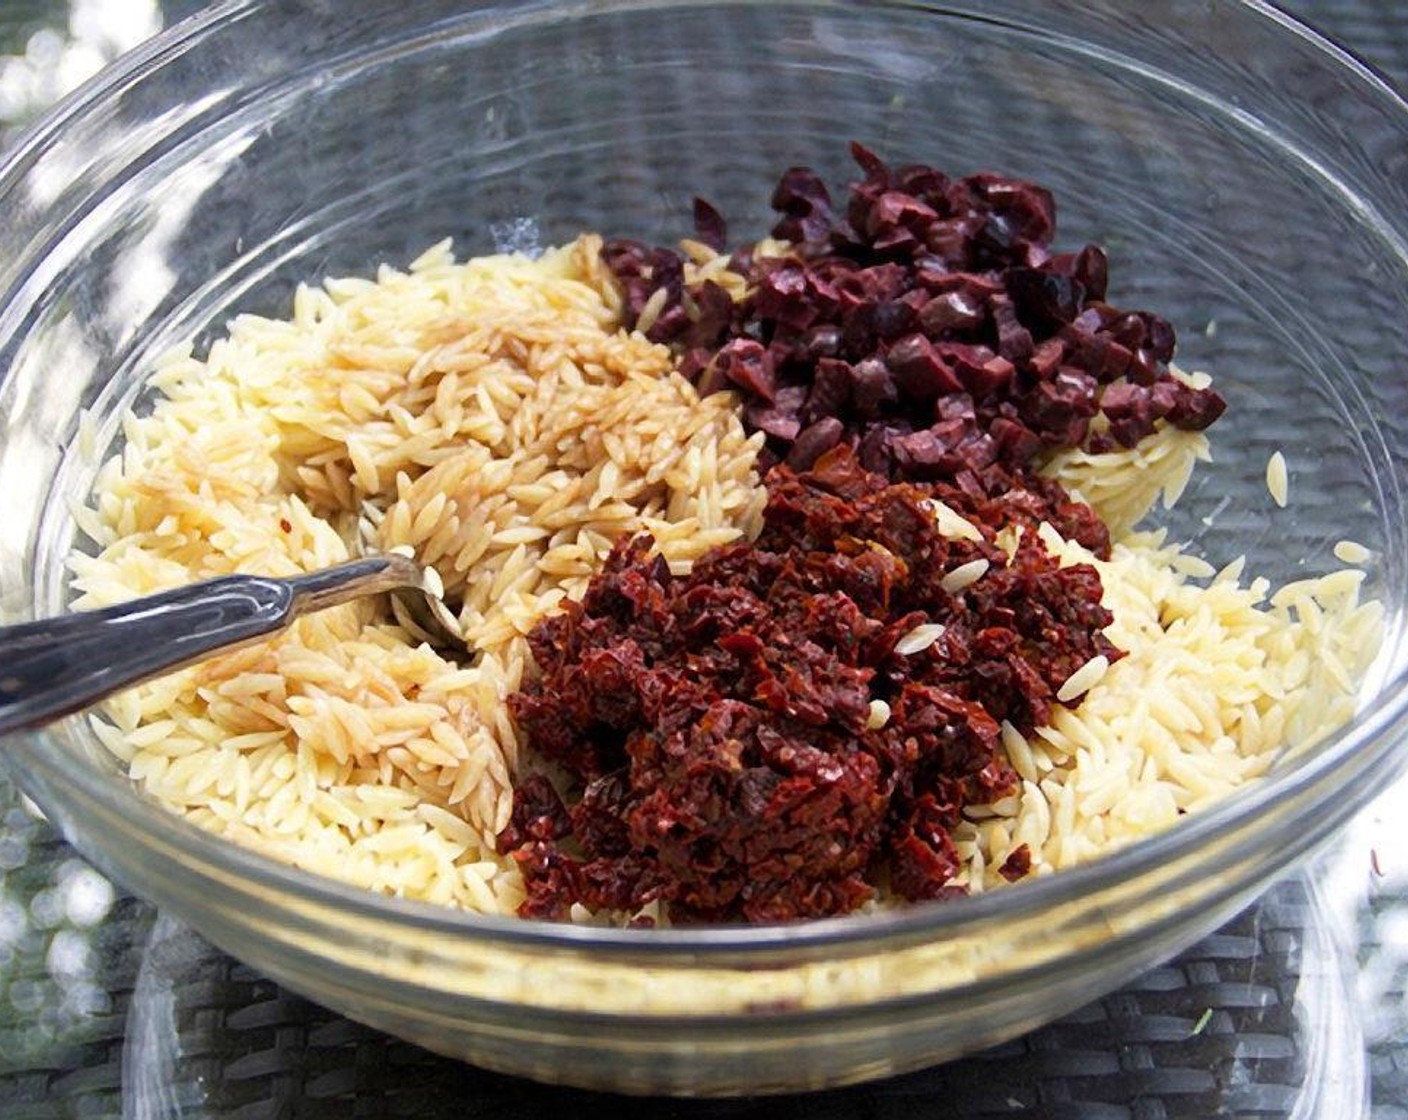 step 2 Add Extra-Virgin Olive Oil (1/3 cup), Balsamic Vinegar (1/3 cup), Sun-Dried Tomatoes (2/3 cup), and Kalamata Olives (2/3 cup). Stir to combine with the cooked orzo.